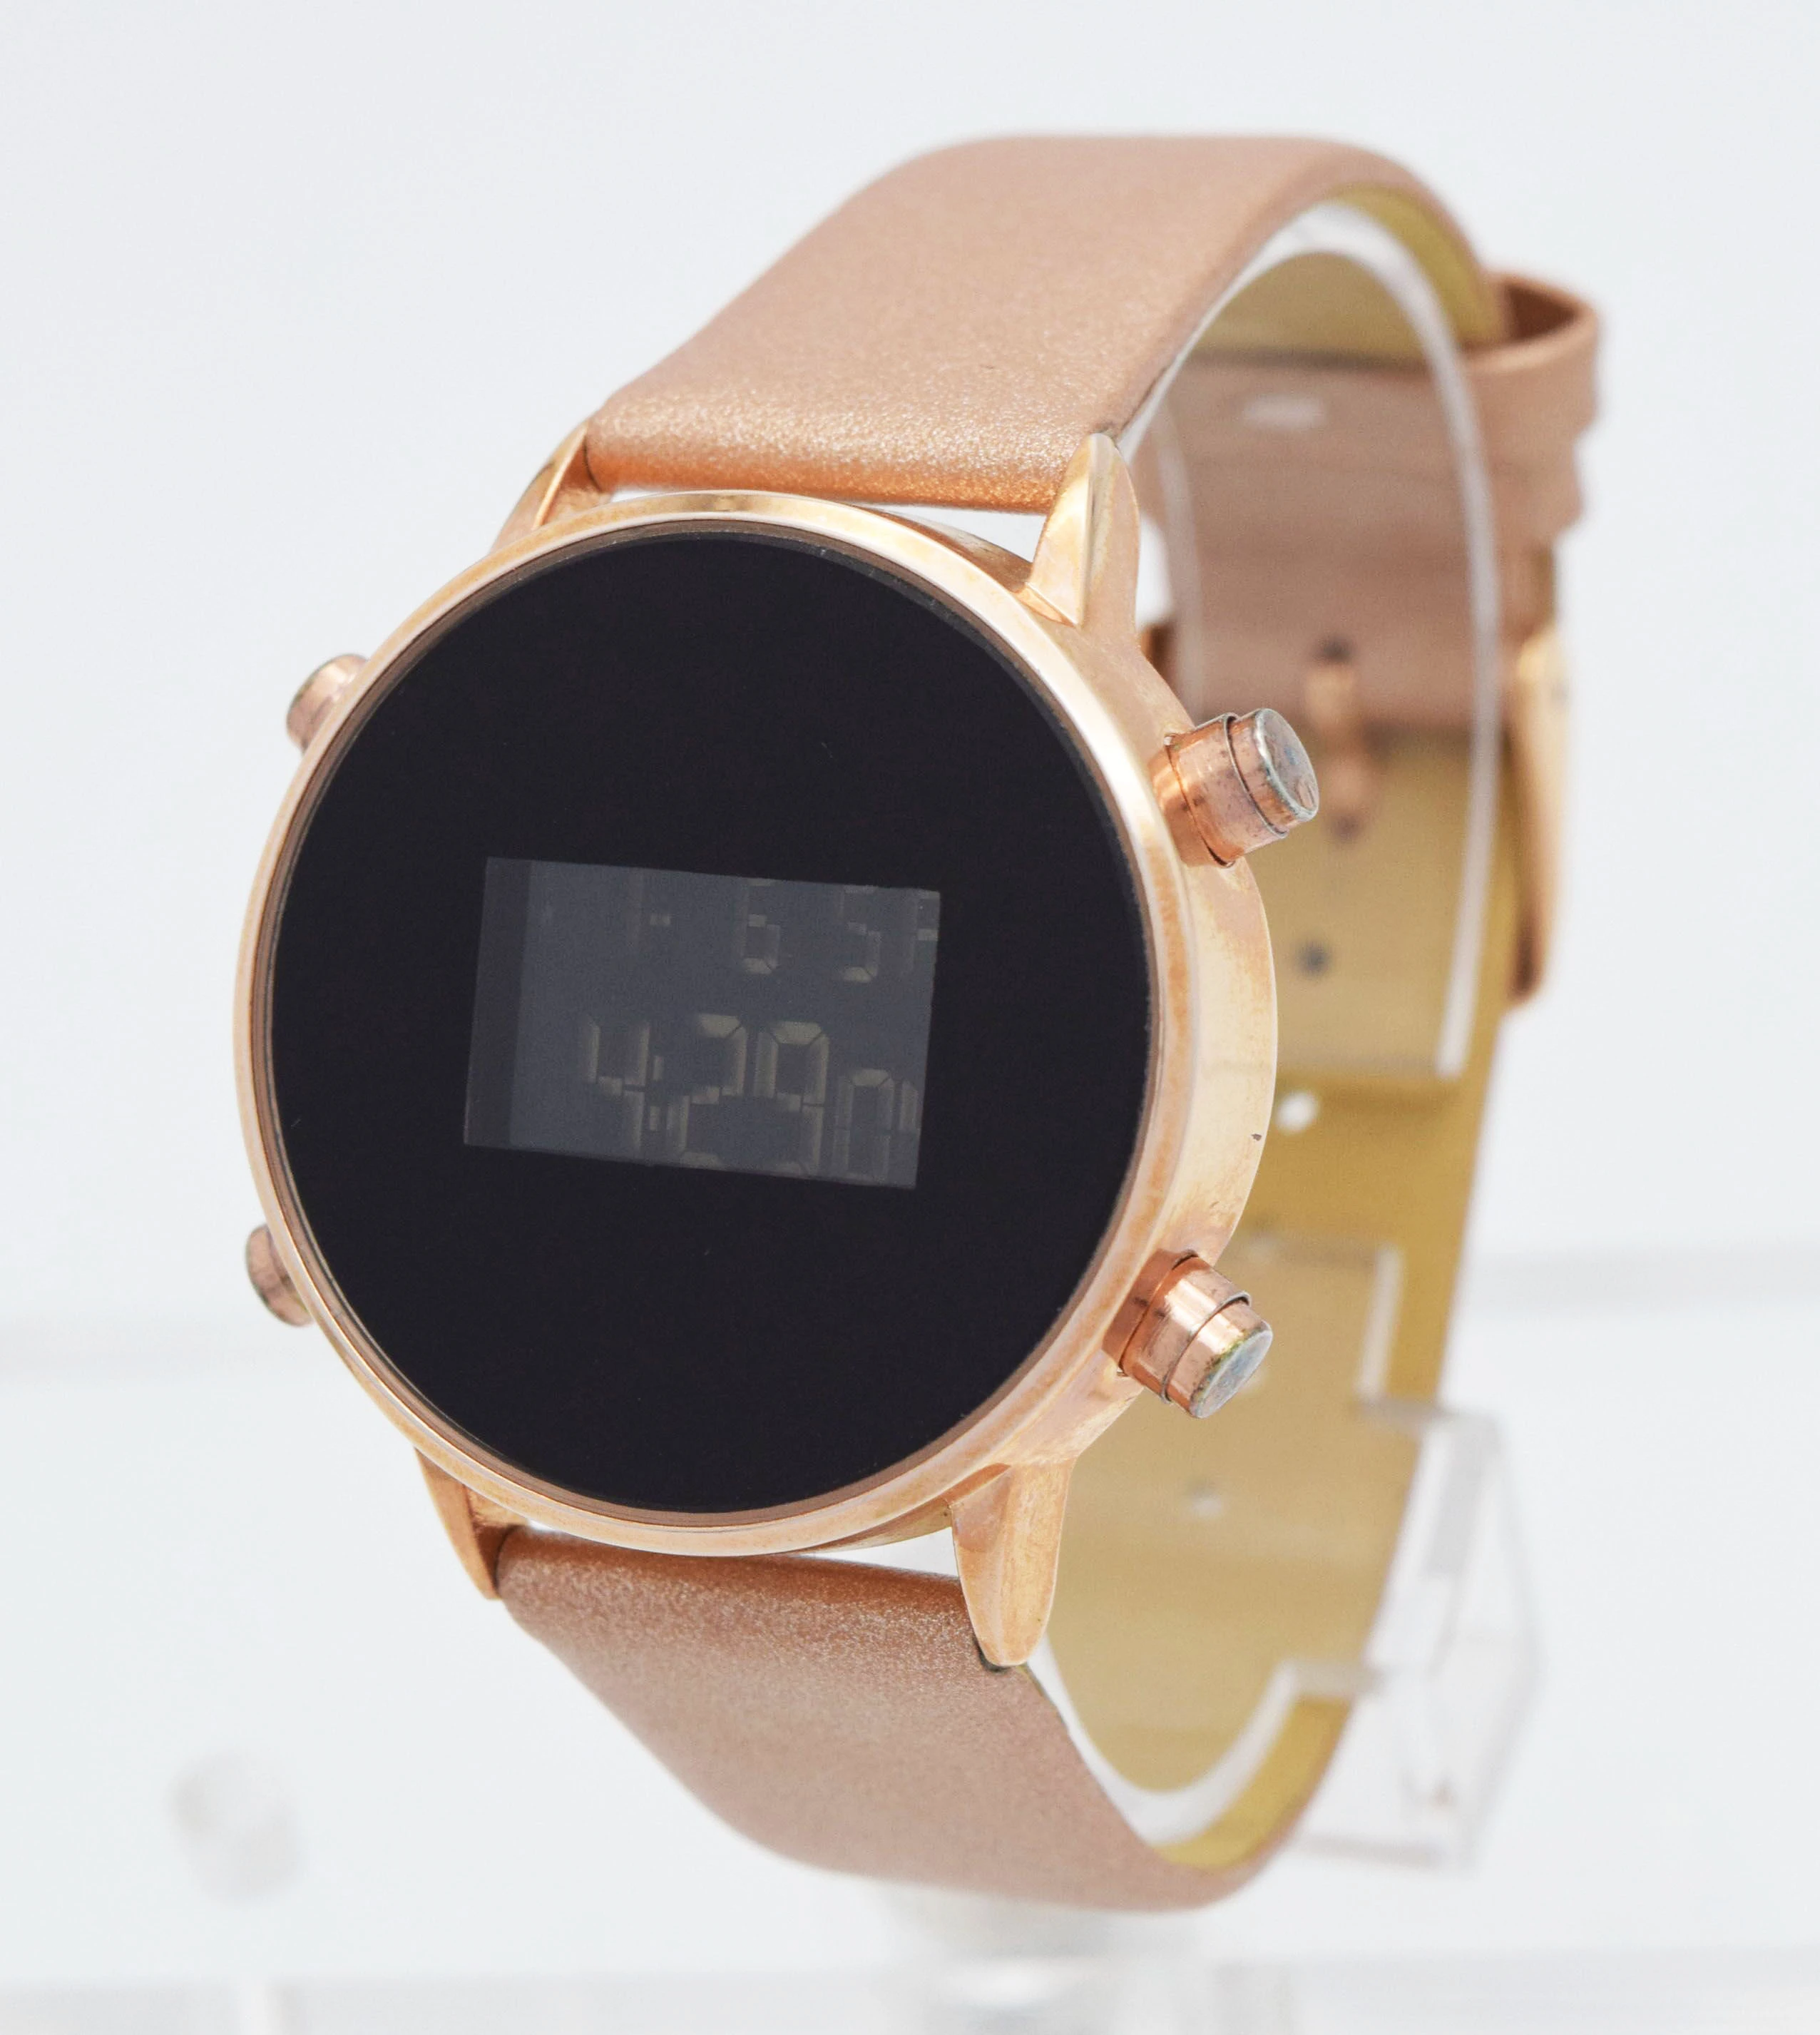 Fashion Sport Digital Watch Women With Glitter Leather Strap Brand Your Own Watches